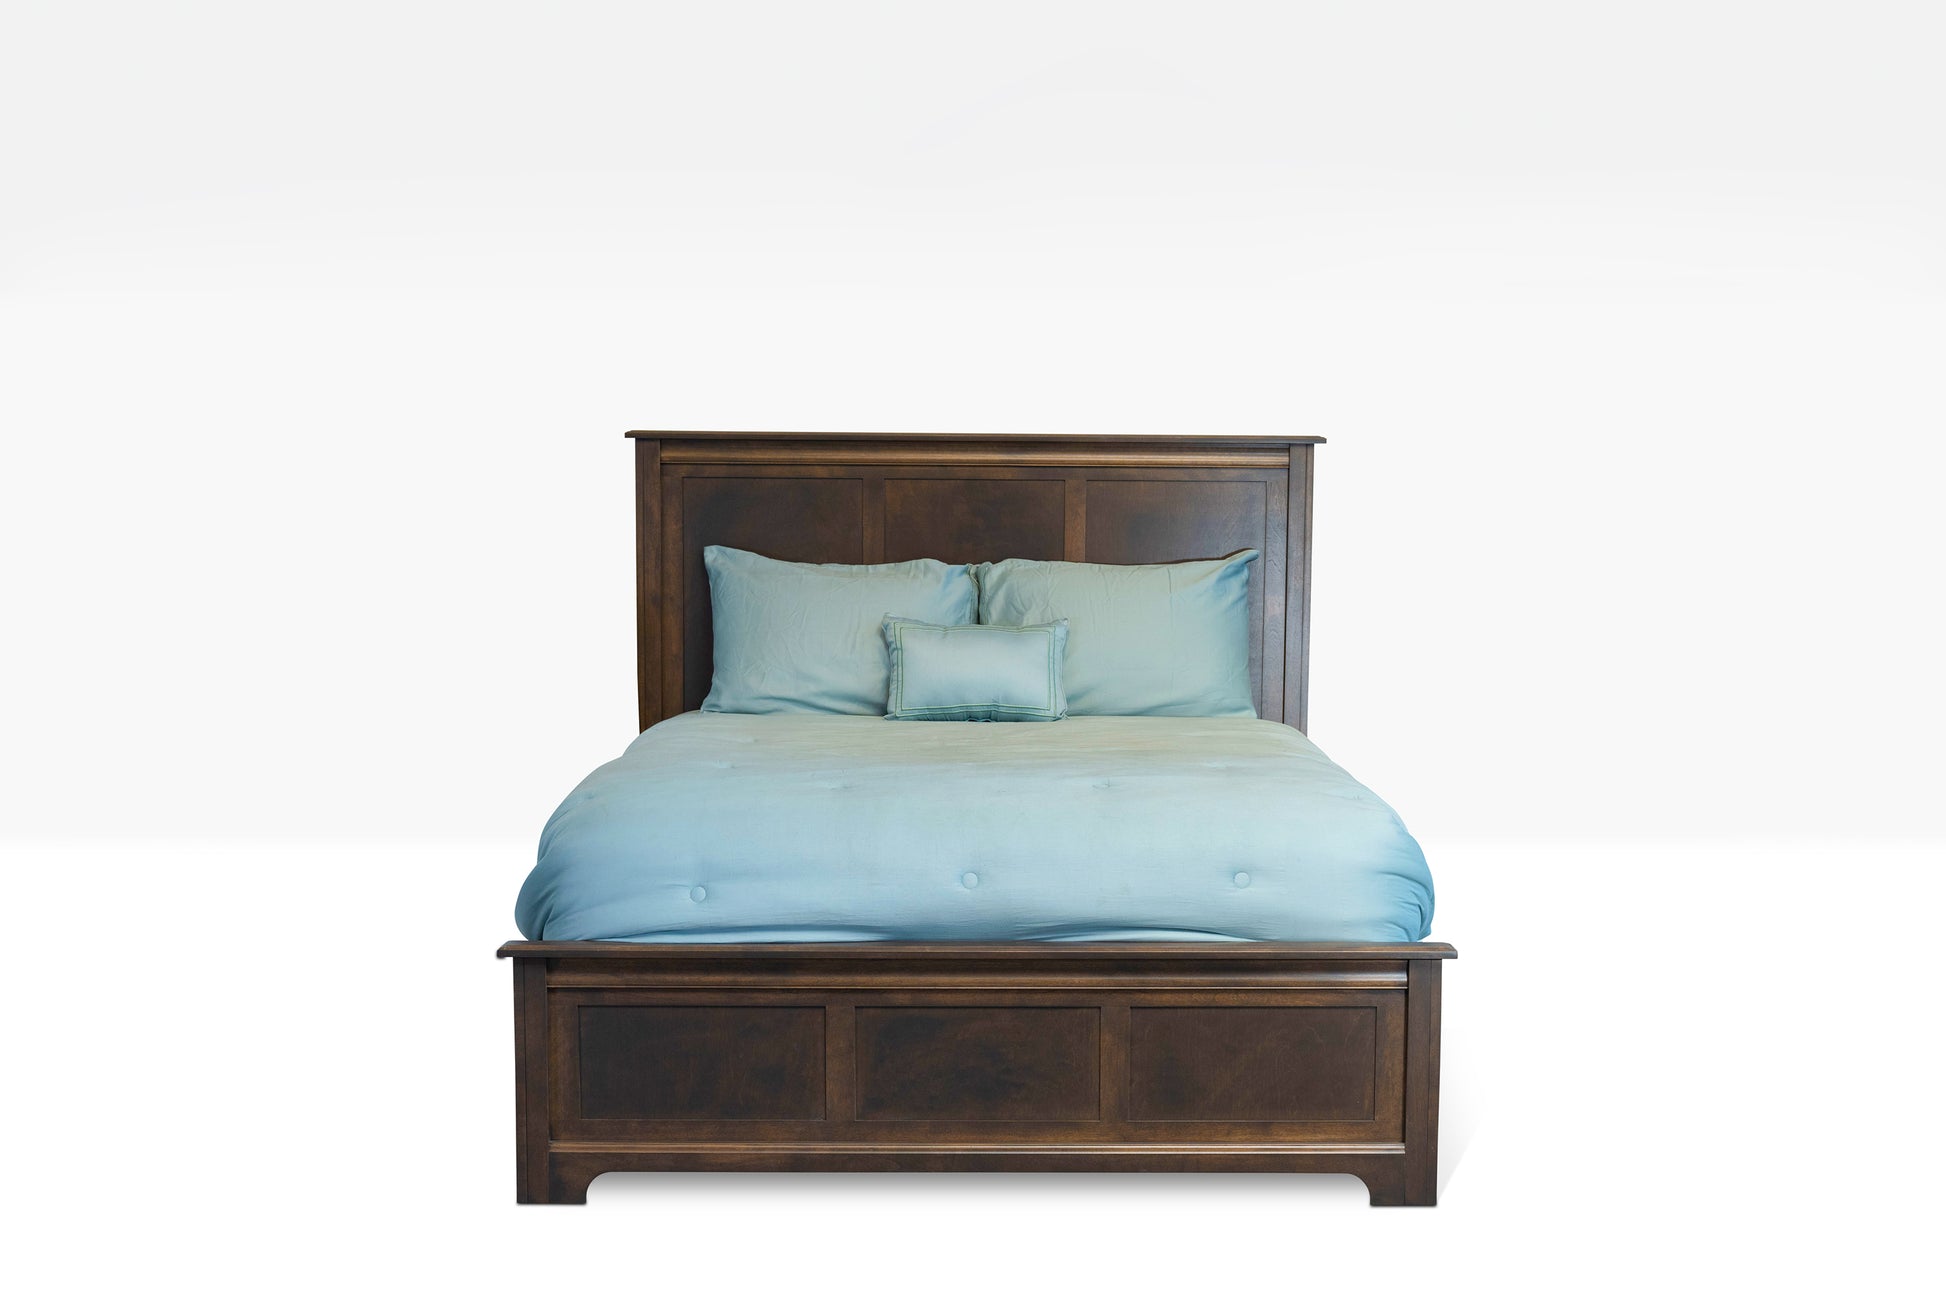 Acadia Madison Platform Bed, Shown in queen size in Driftwood finish.